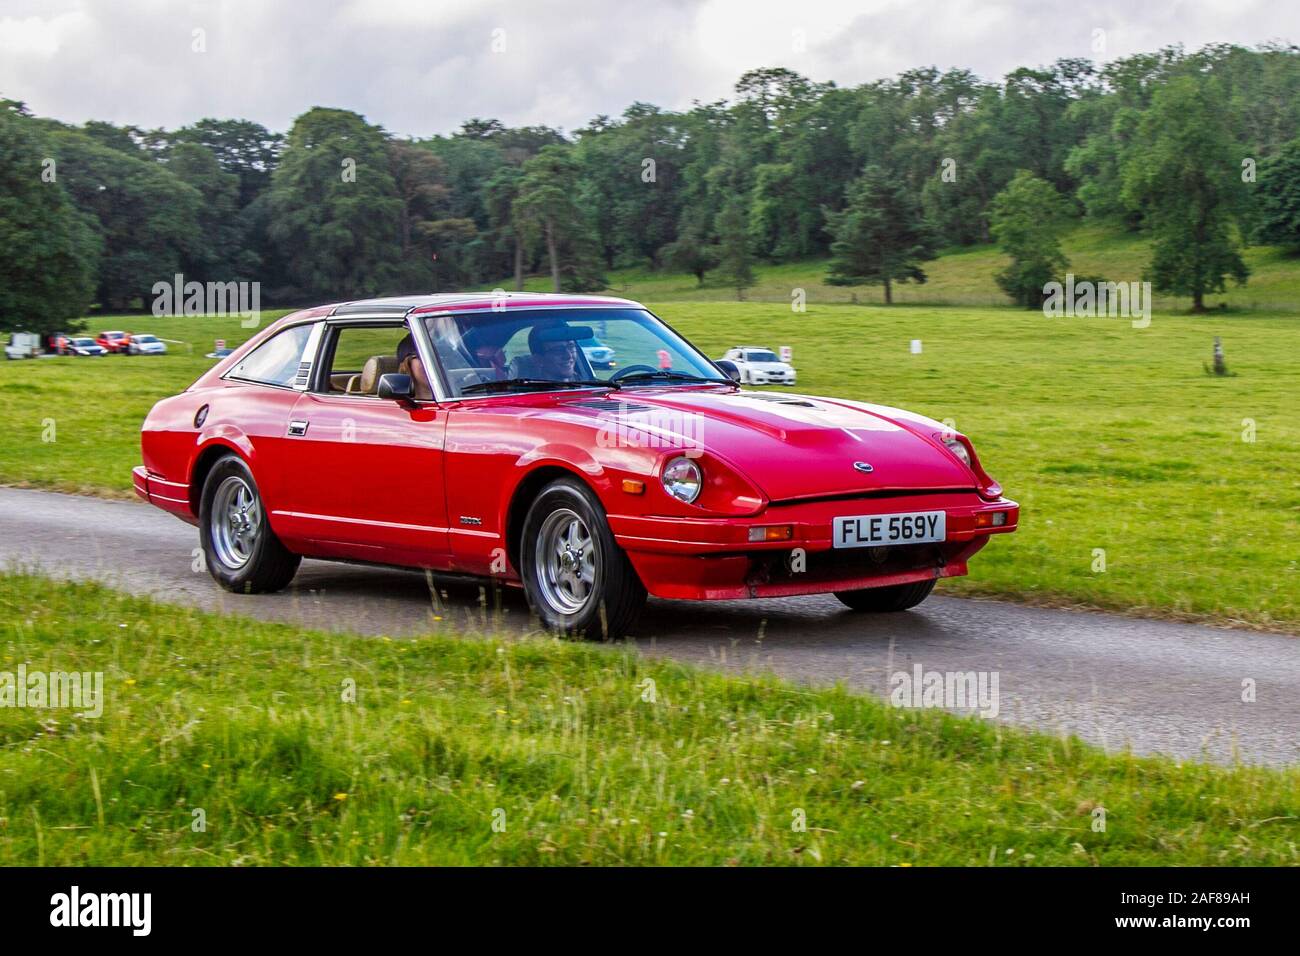 1983 80s red Datsun 280 ZX; Classic cars, historic, cherished, old timers, collectable restored vintage veteran, heritage vehicles of yesteryear arriving for the Mark Woodward historical motoring event at Leighton Hall, Carnforth, UK Stock Photo